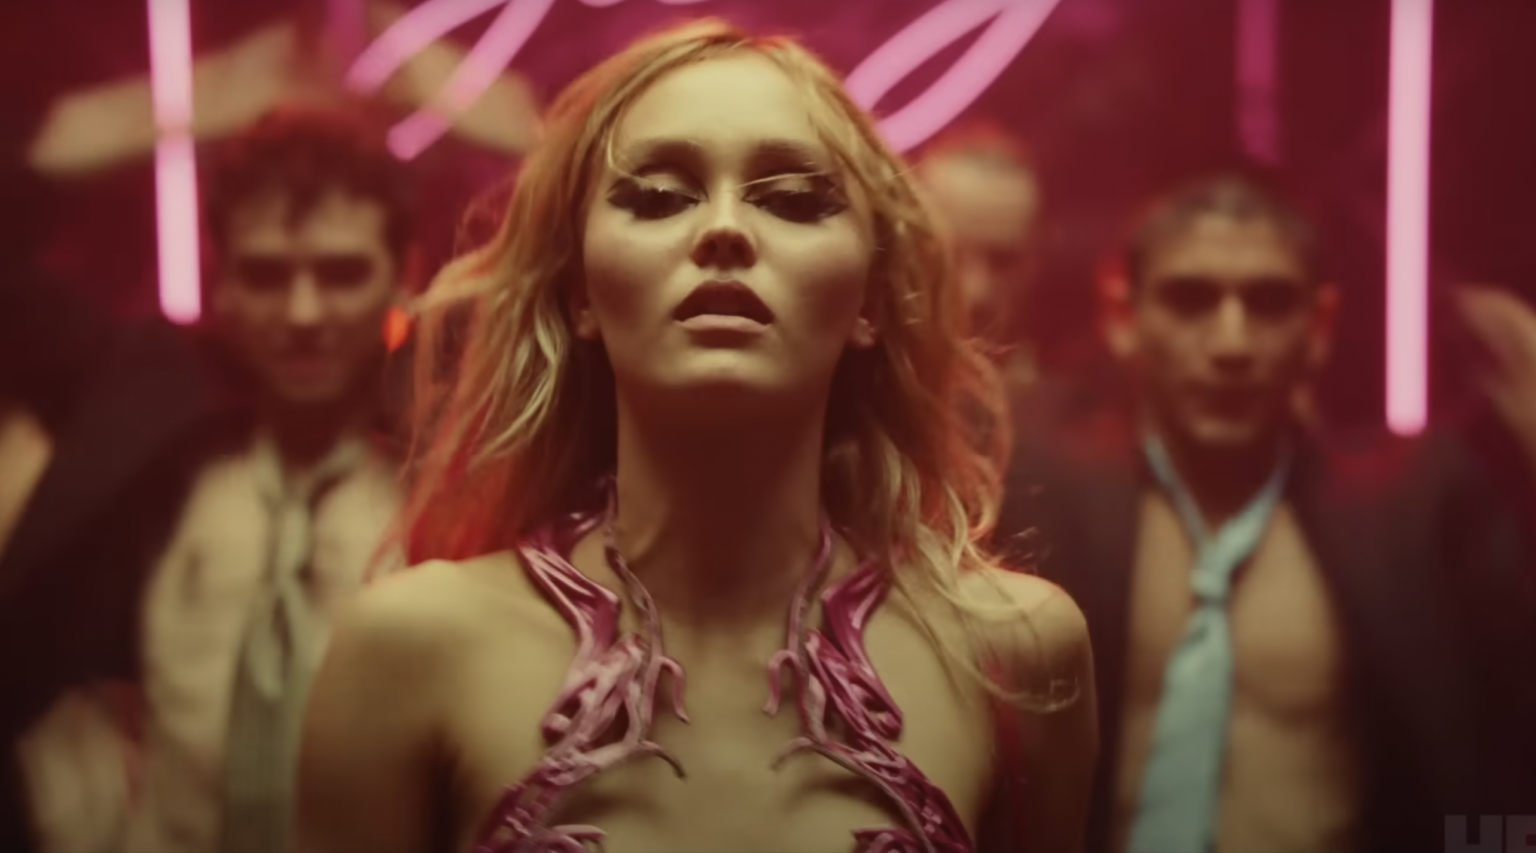 Lily Rose Depp The Weeknd Heat Up The Idol Hbo Max Teaser Trailer Maxim